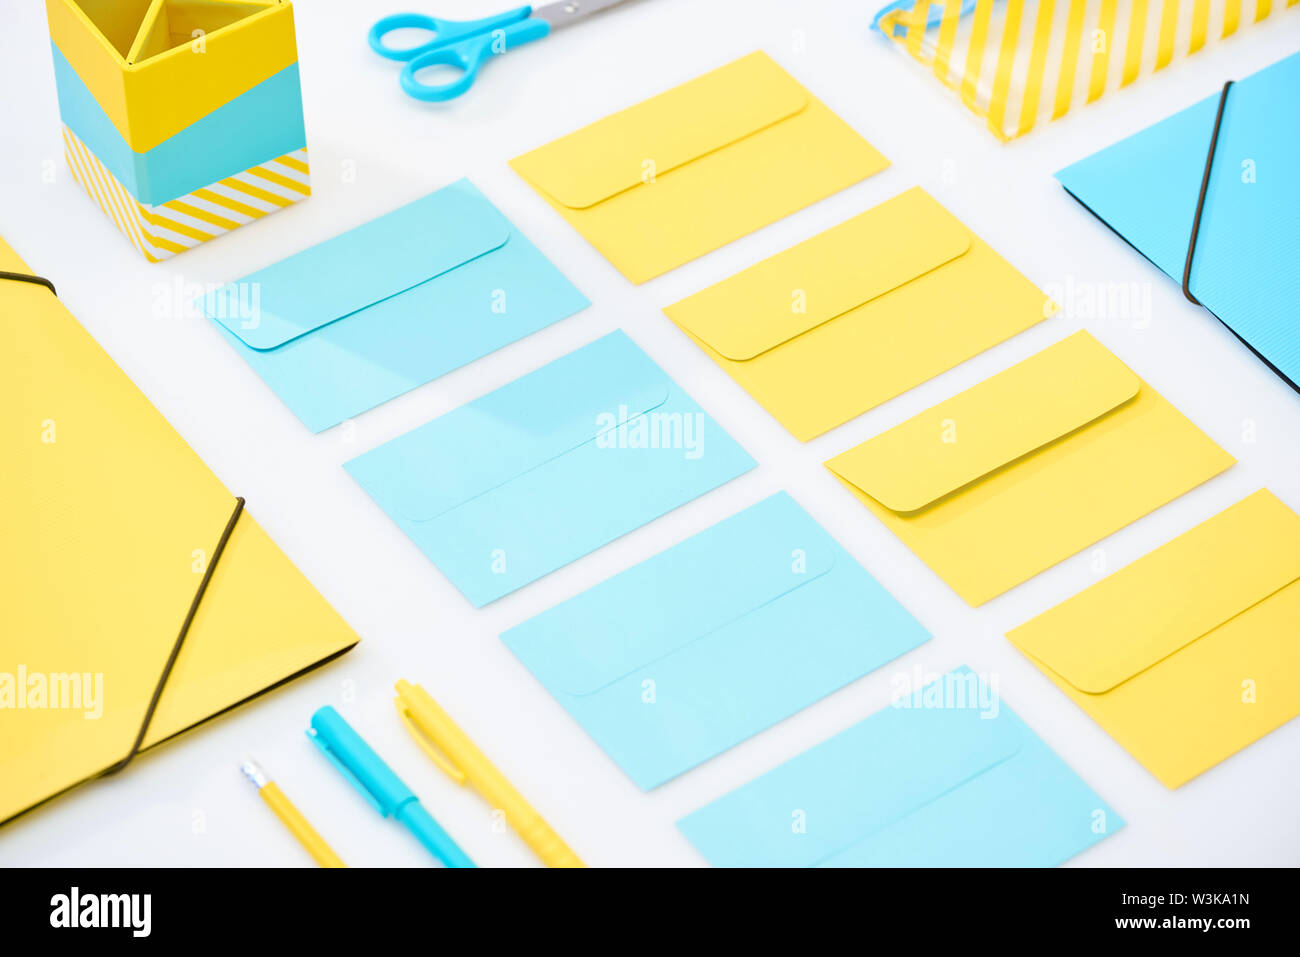 flat lay of blue and yellow envelopes and other stationery on white background Stock Photo